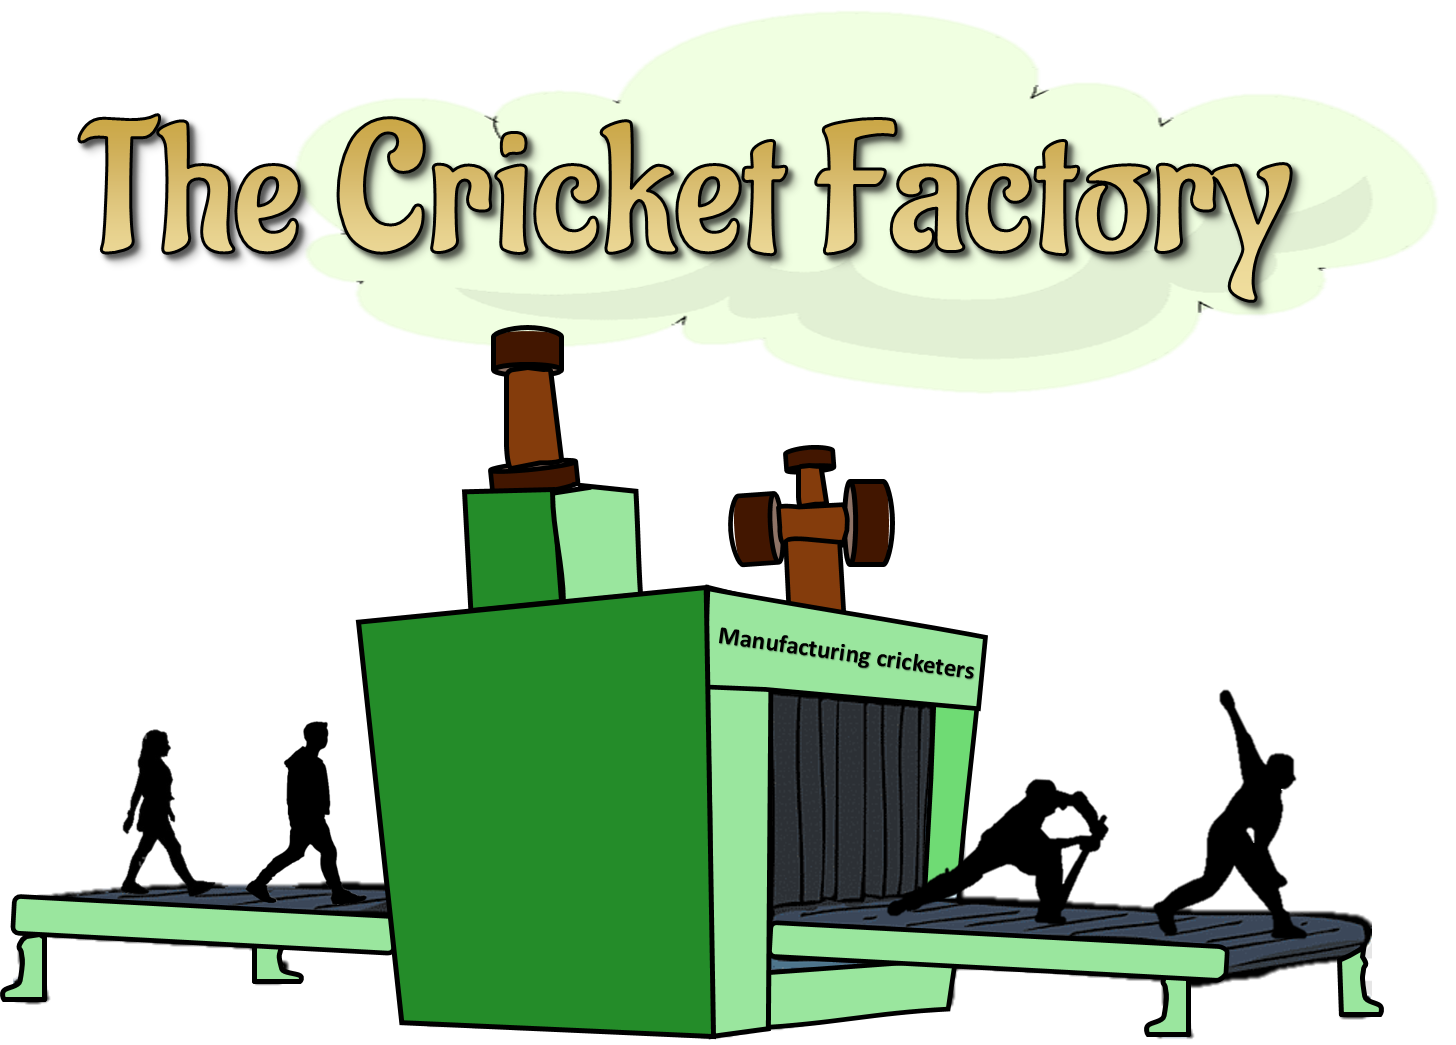 The Cricket factory